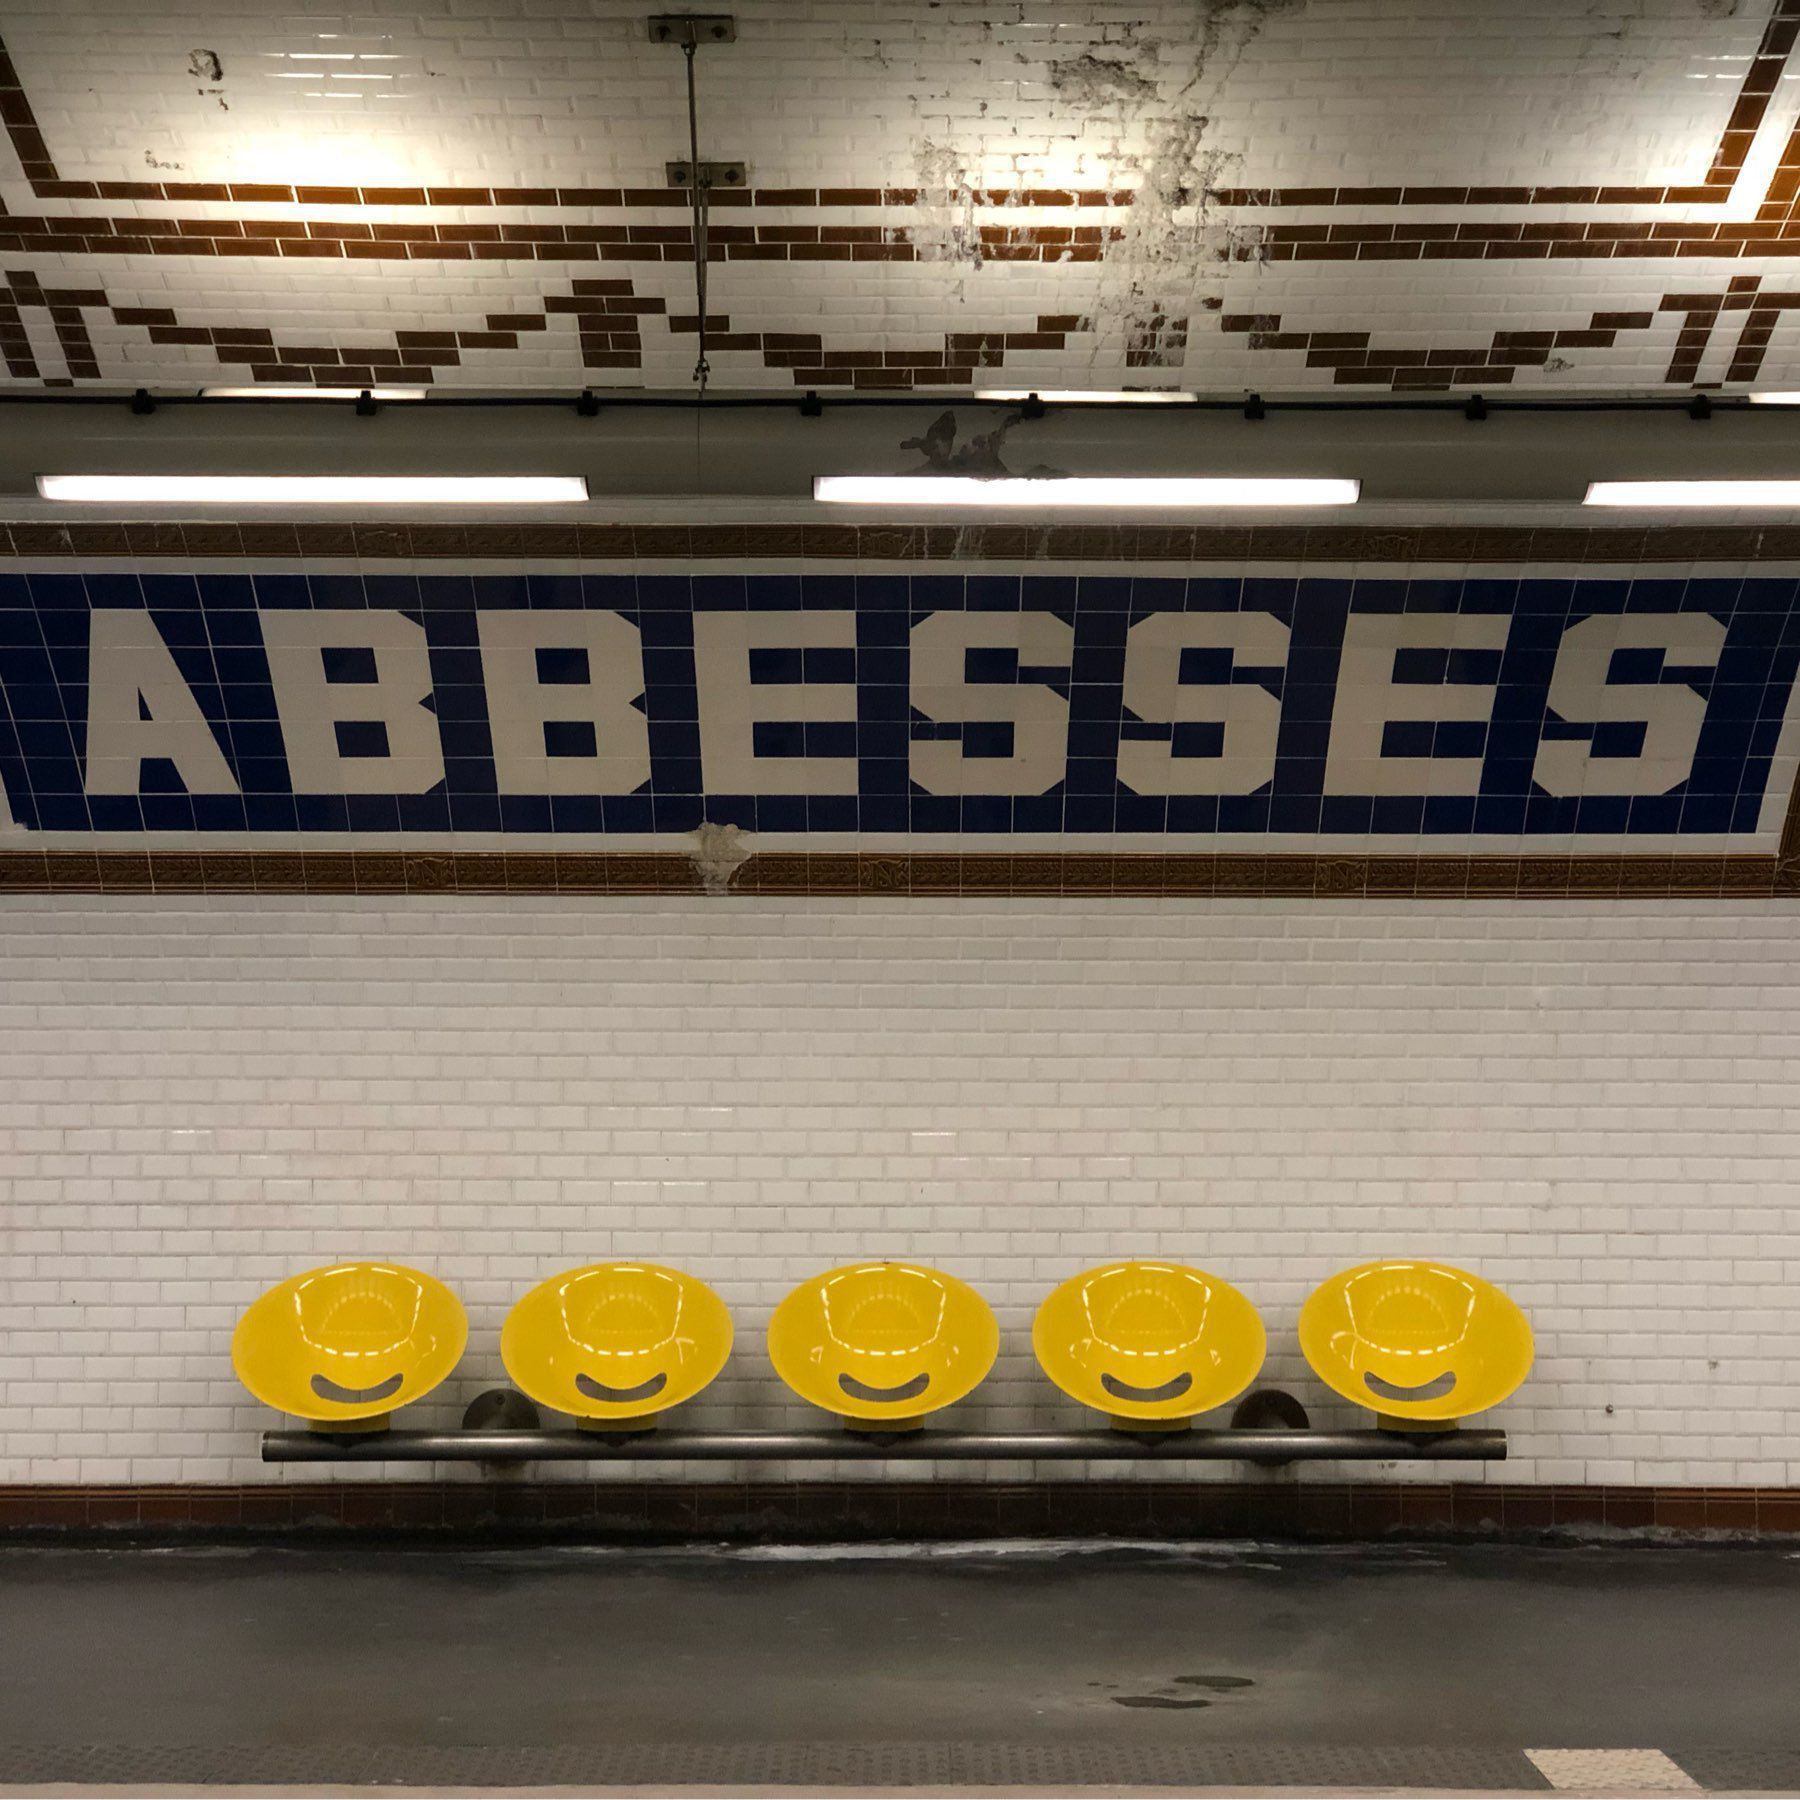 Subway station wall with tile “Abbesses” lettering.